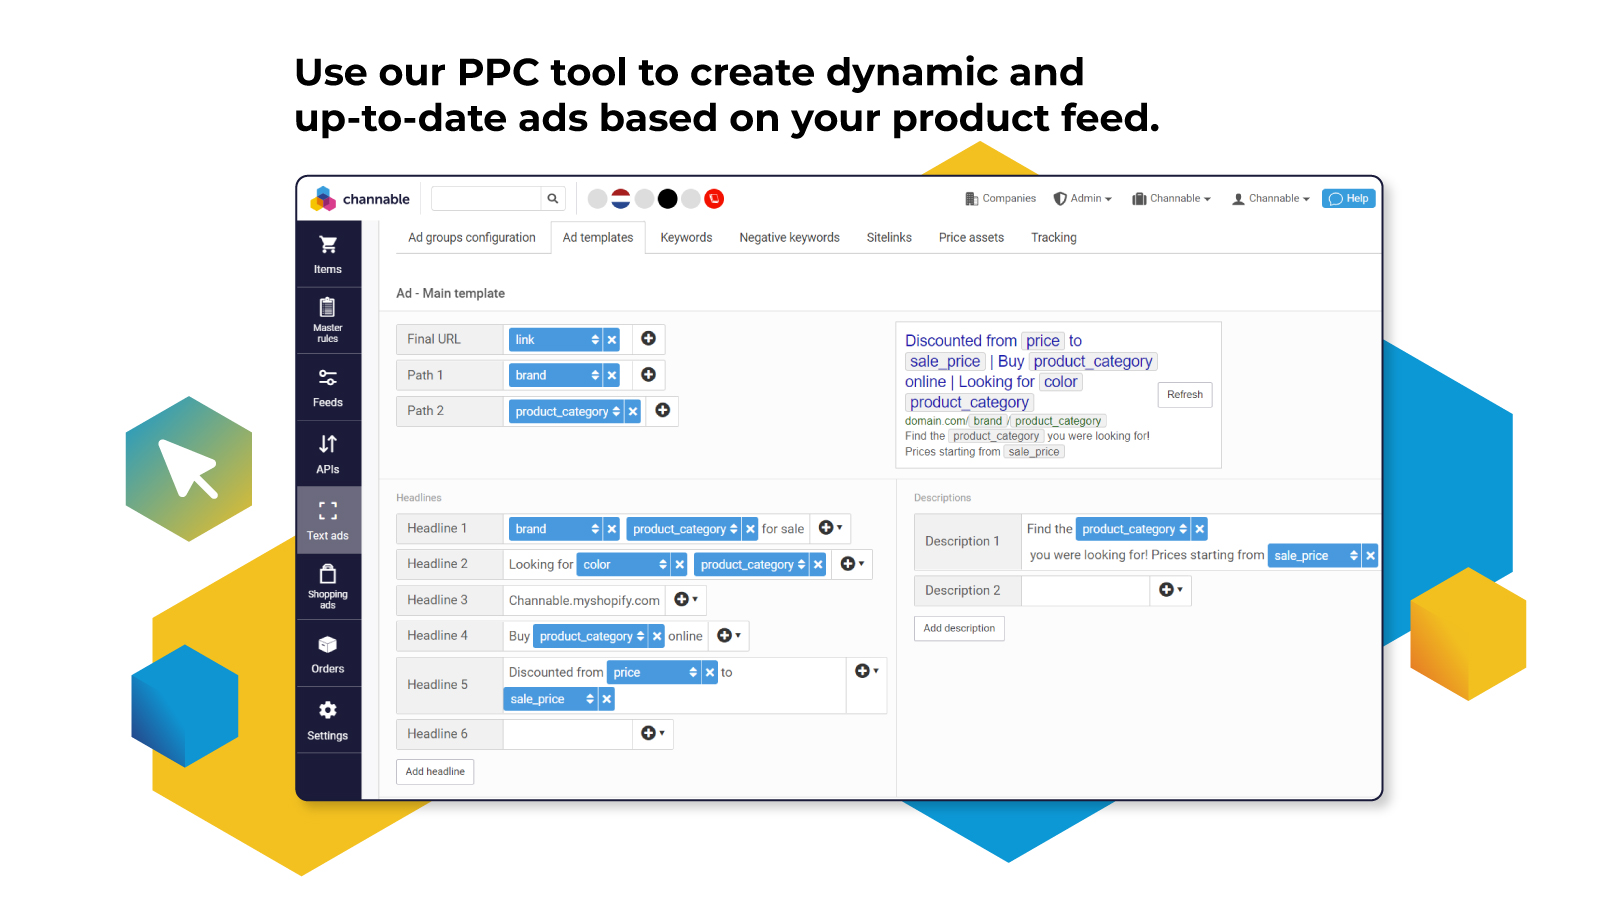 Use our PPC tool to create dynamic and up-to-date ads based on your product feed